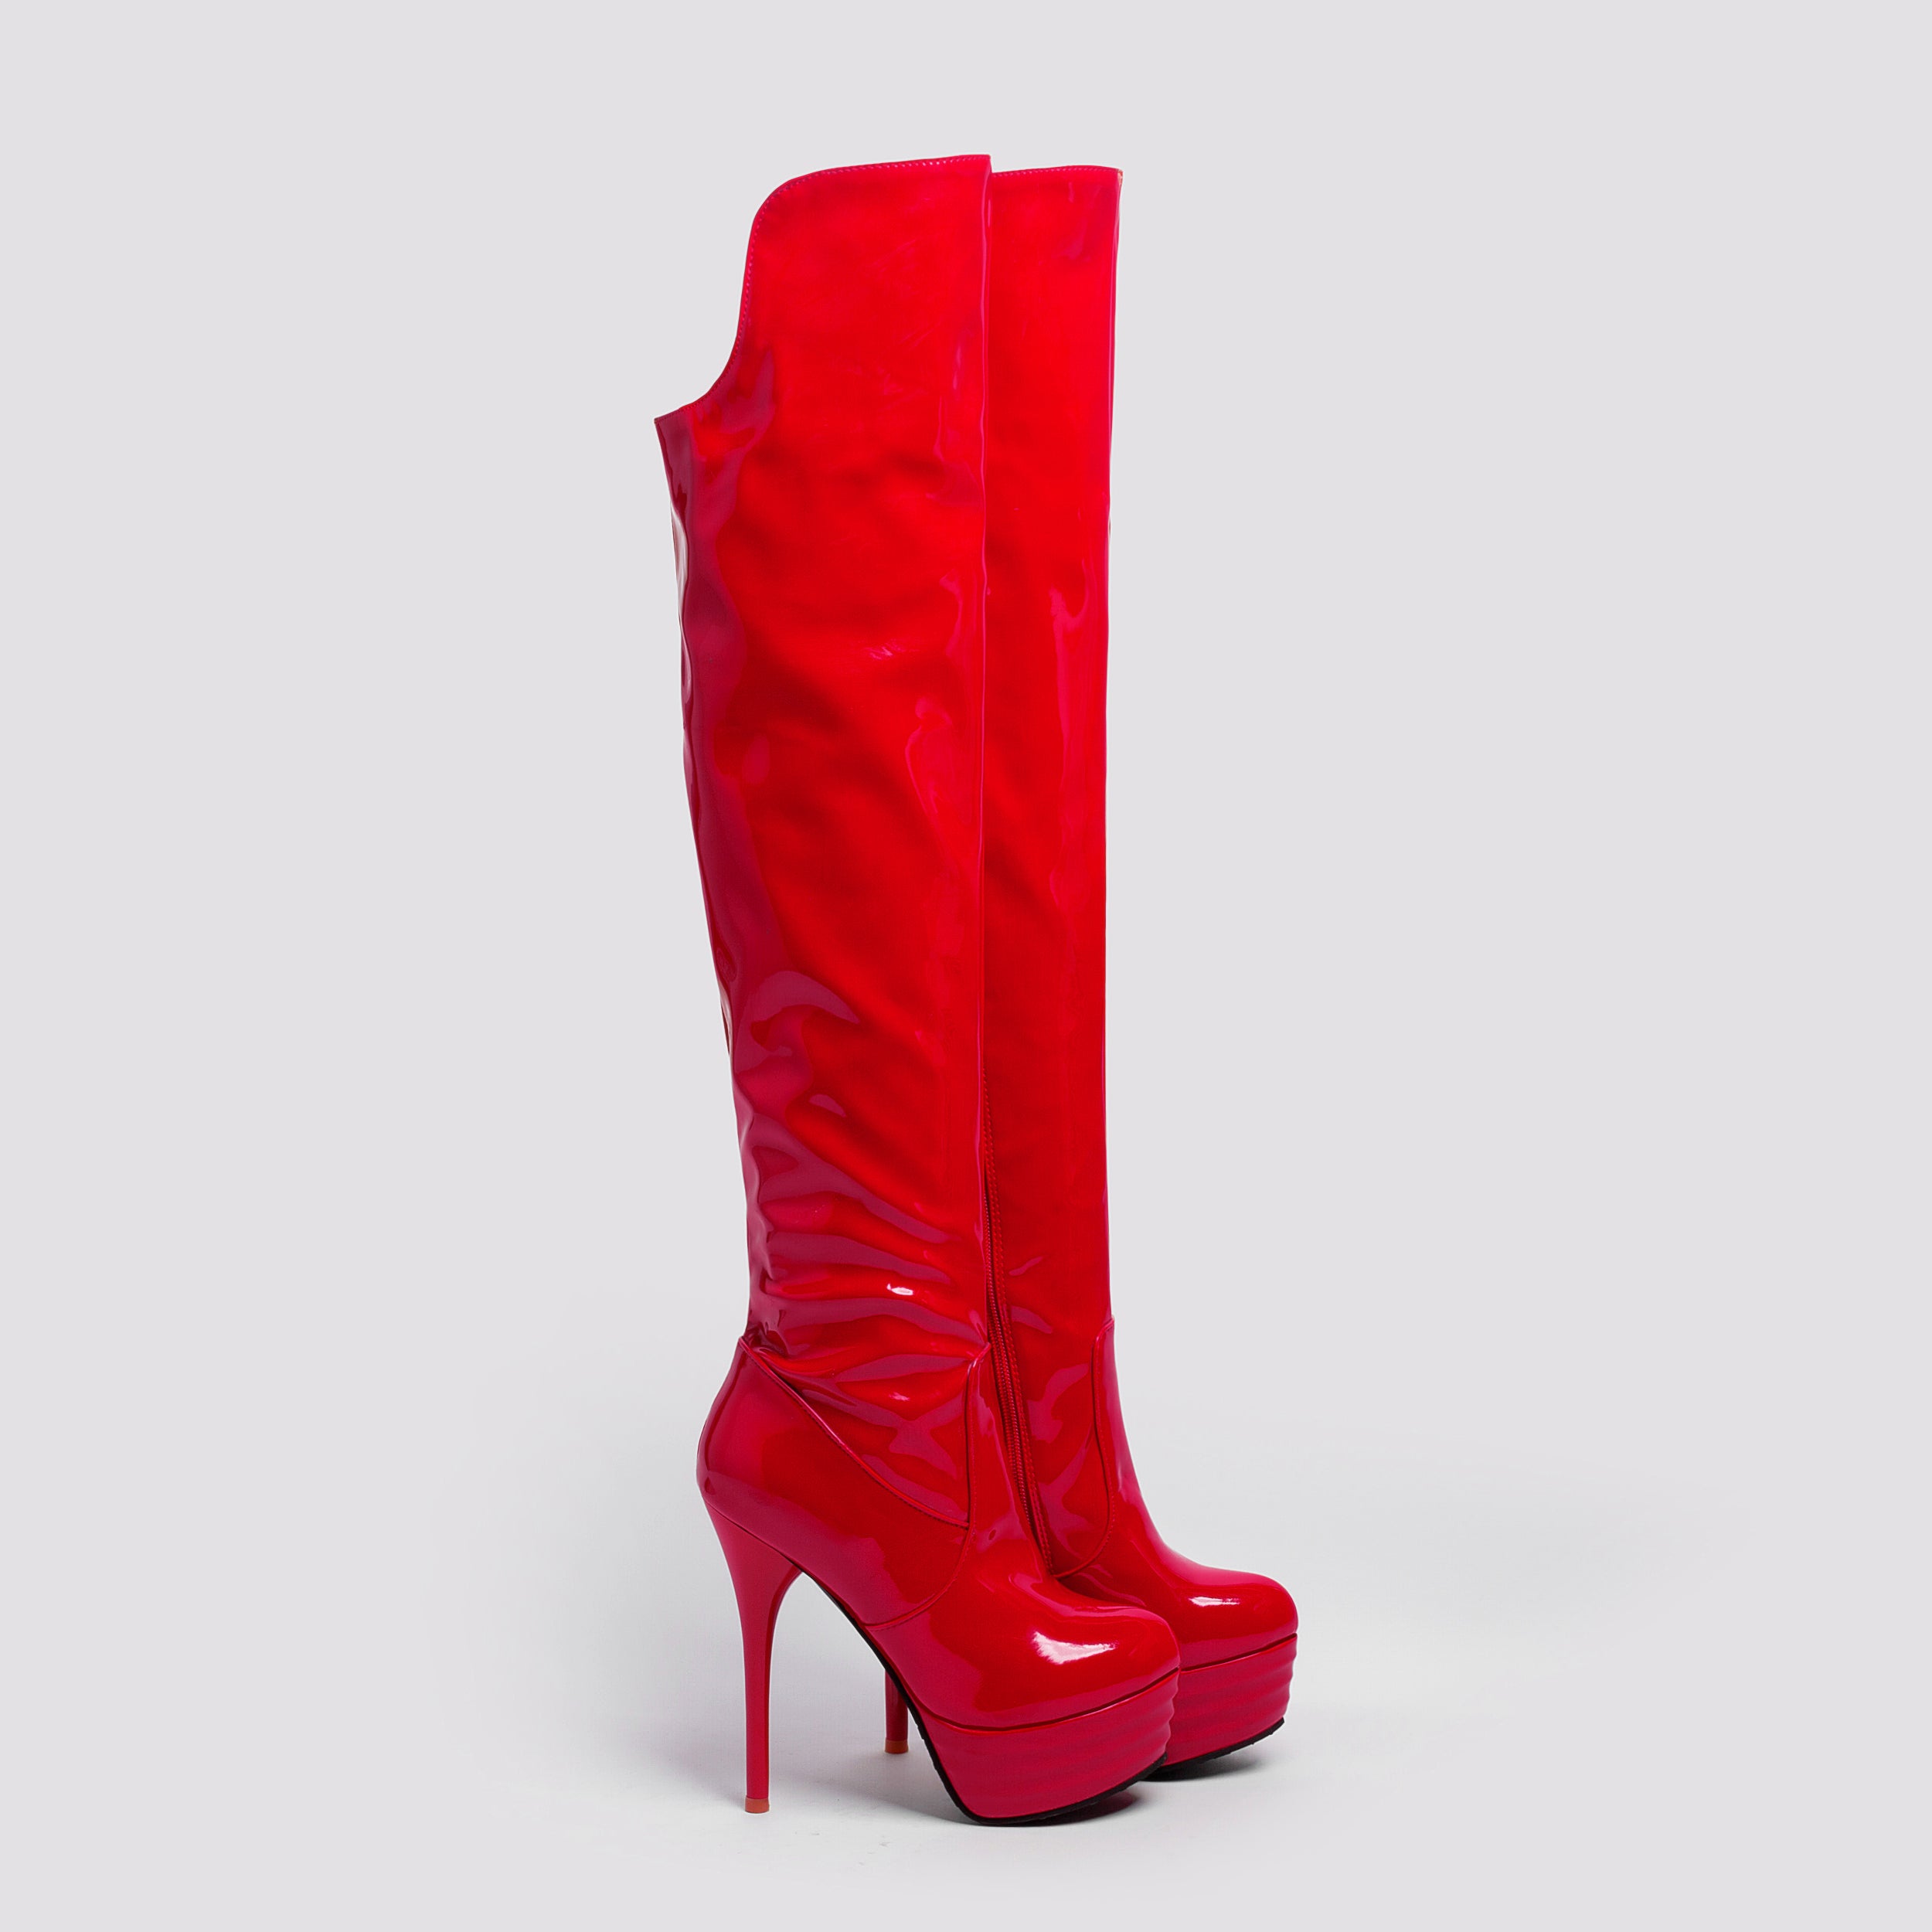 Bigsizeheels Waterproof covered knee-high heel boots - Red freeshipping - bigsizeheel®-size5-size15 -All Plus Sizes Available!